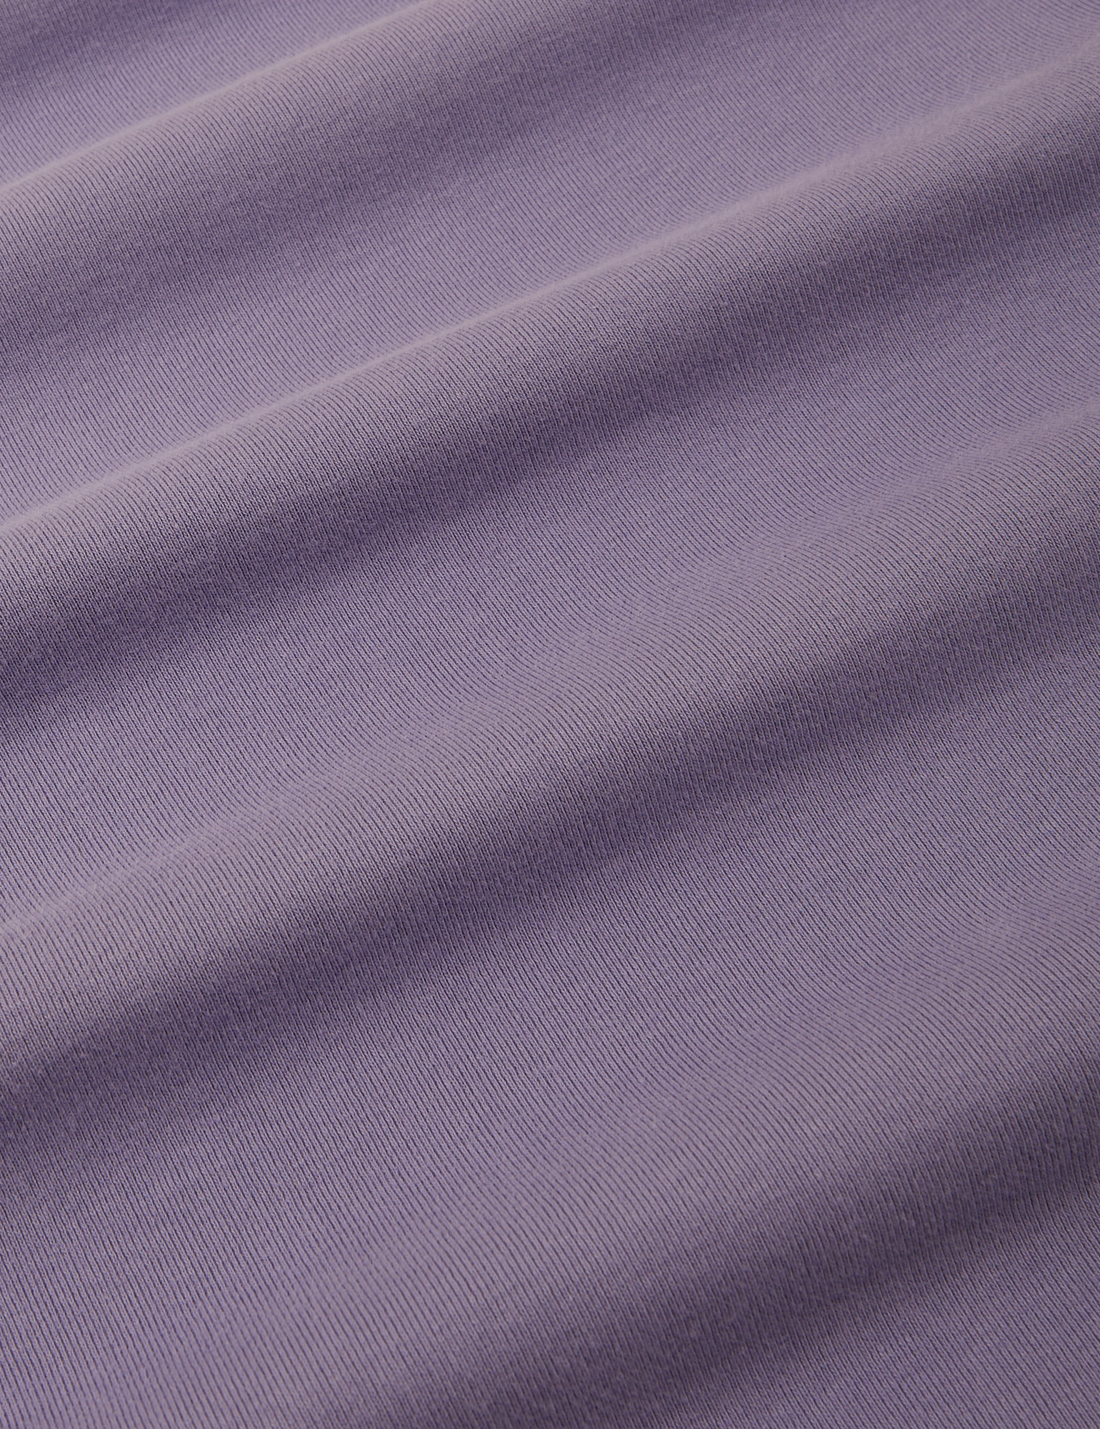 Baby Tee in Faded Grape fabric detail